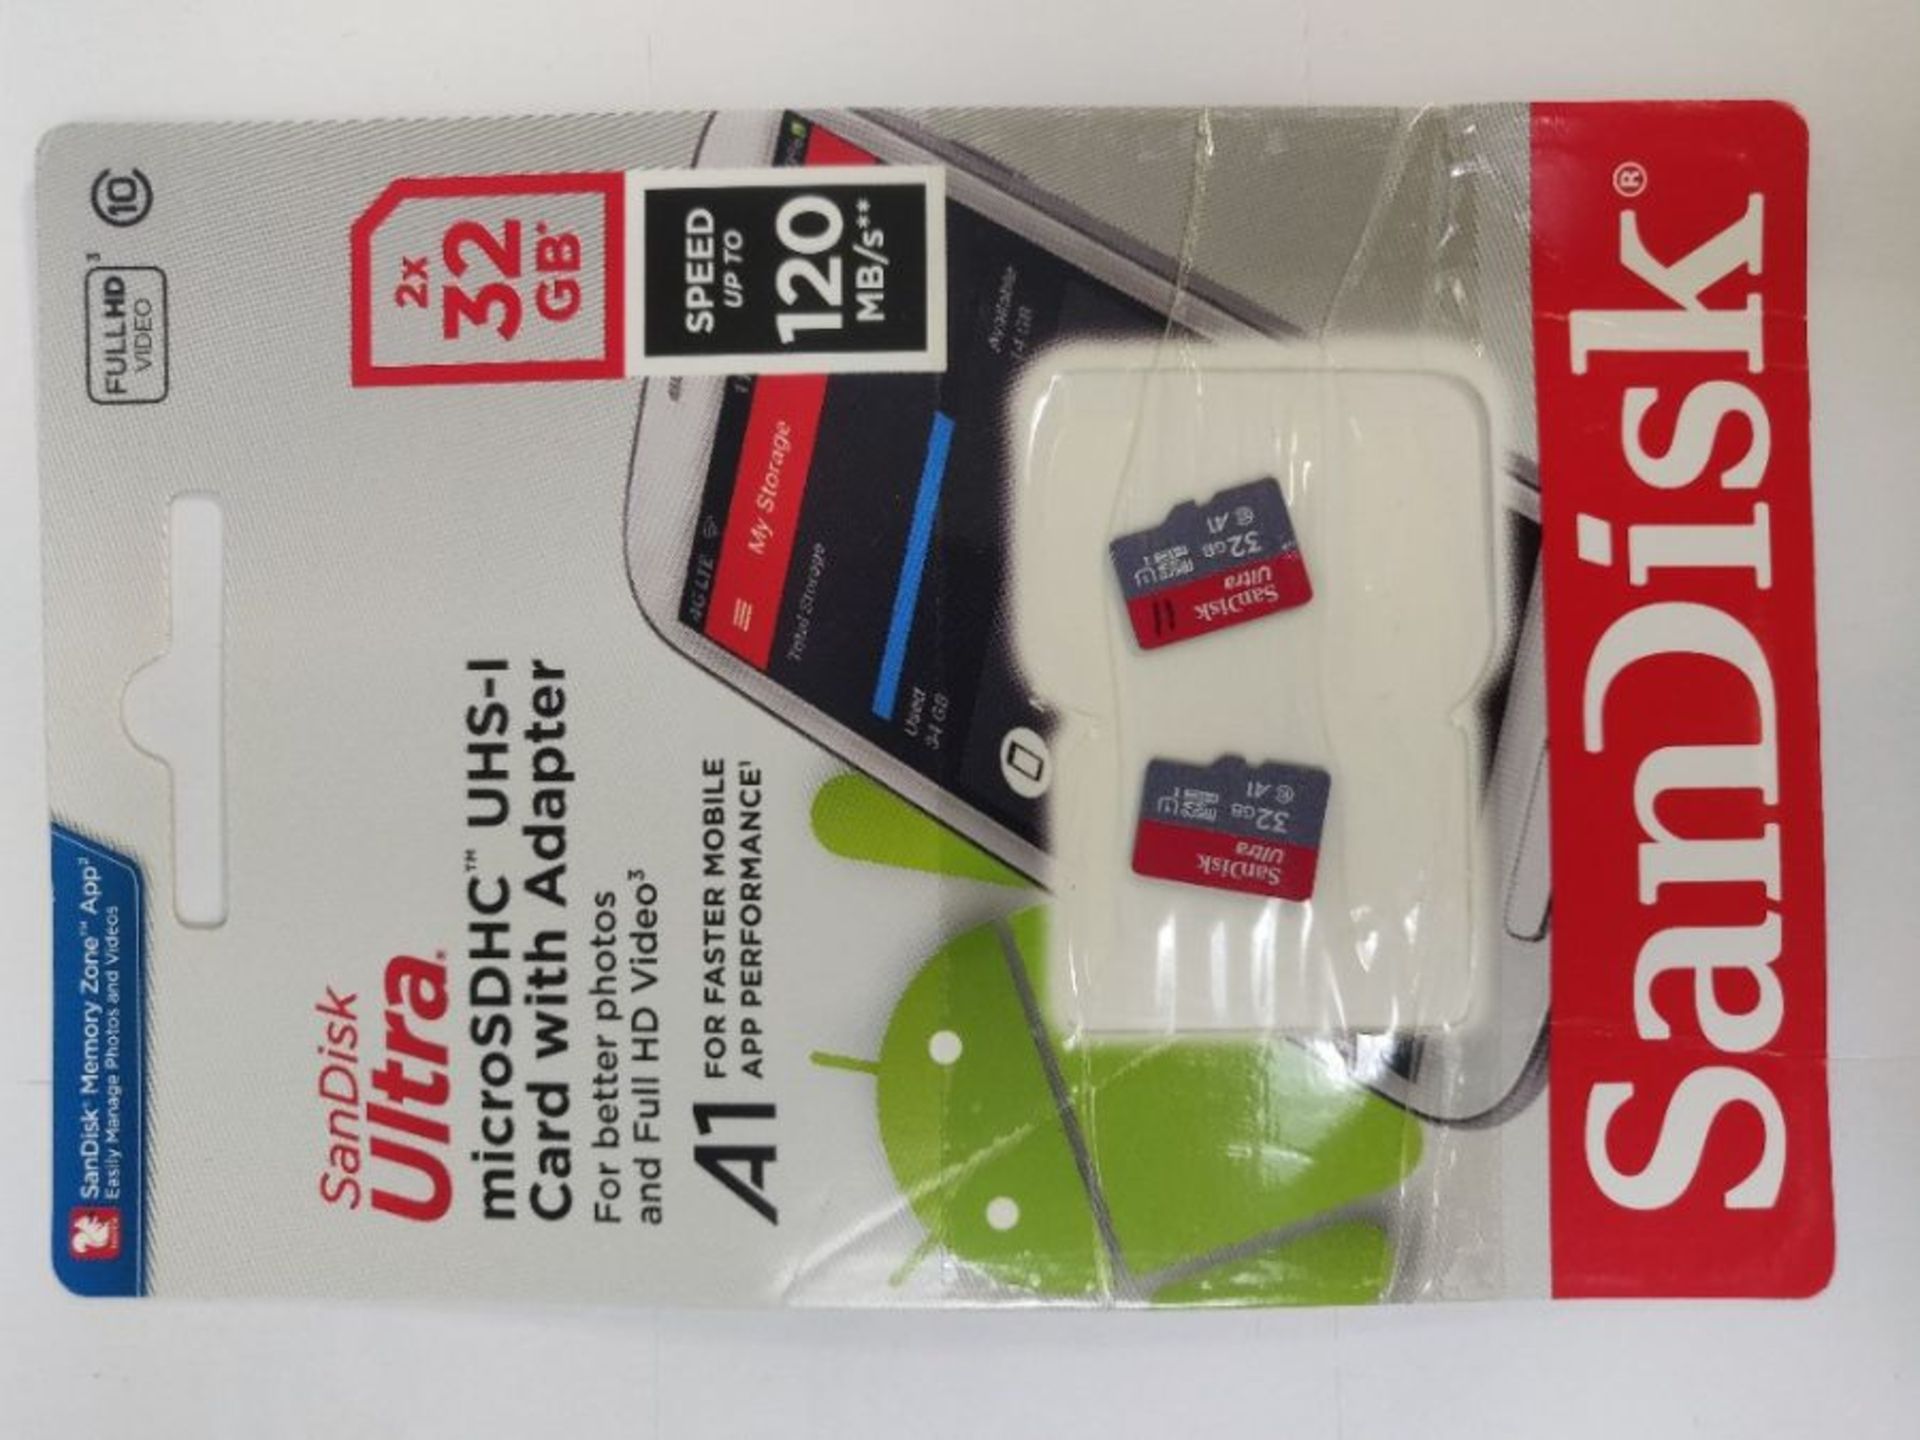 SanDisk Ultra 32 GB microSDHC Memory Card SD Adapter with A1 App Performance Up to 1 - Image 2 of 3